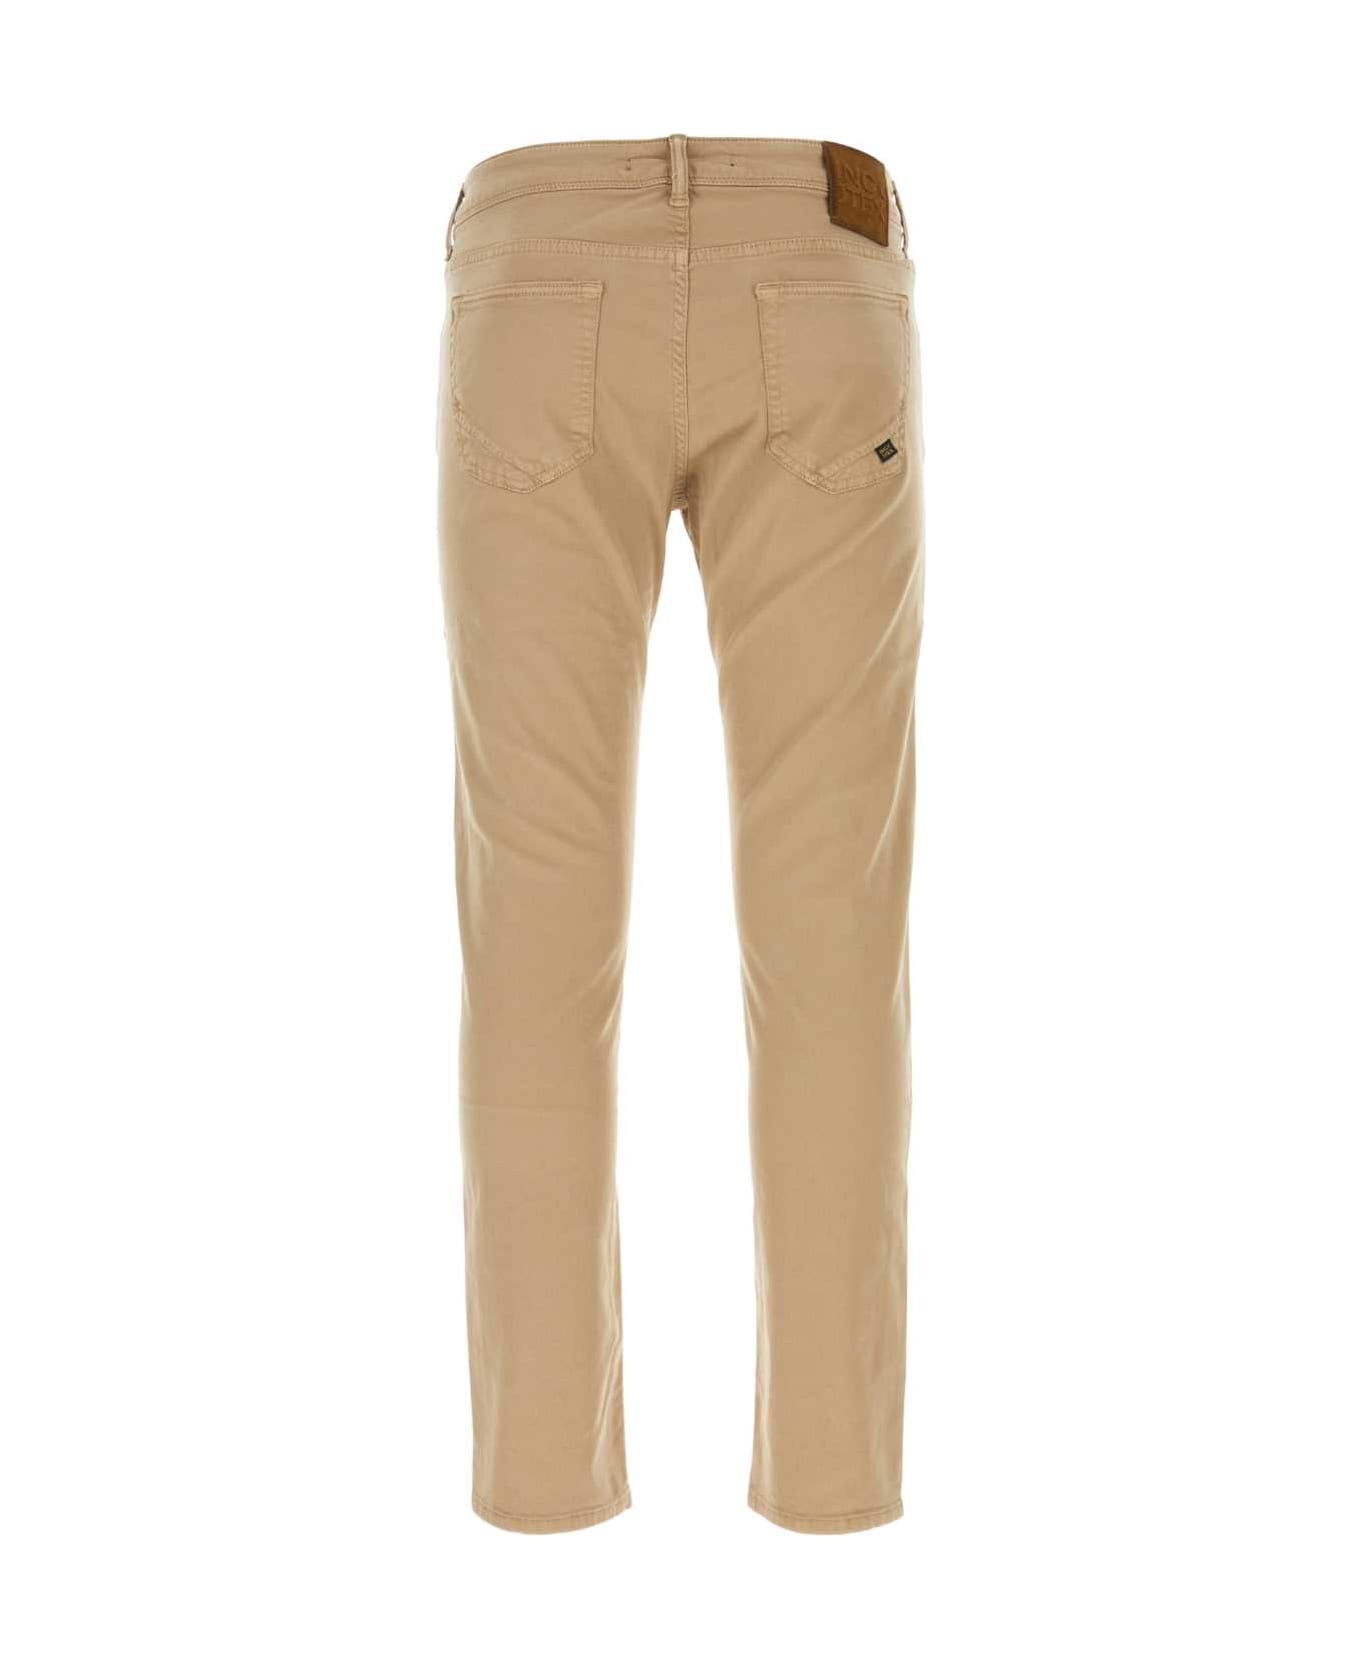 Incotex Beige Stretch Cotton Pant - COLONIALE ボトムス